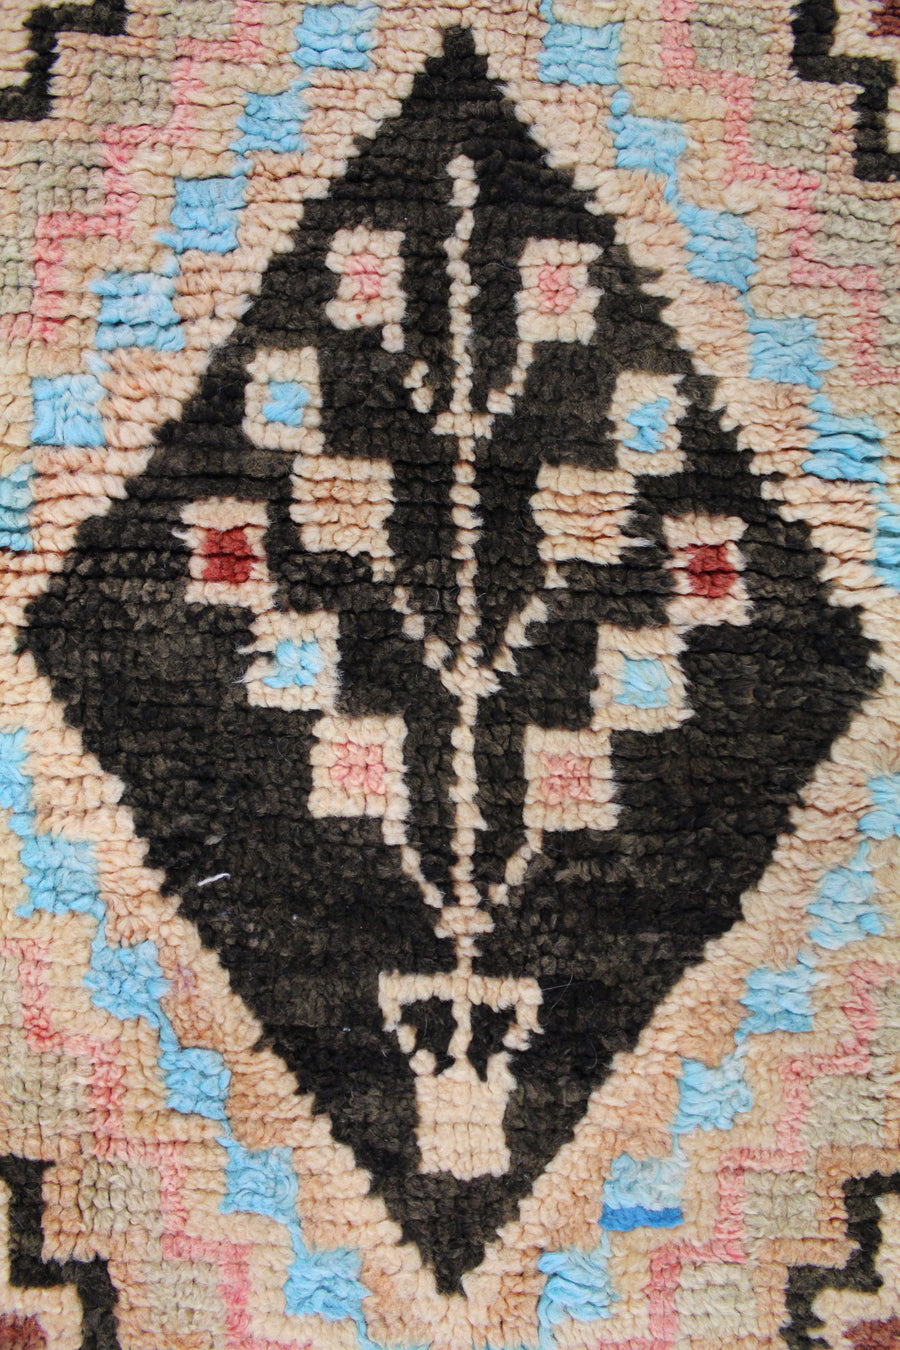 MOROCCAN HANDKNOTTED RUG, 61924